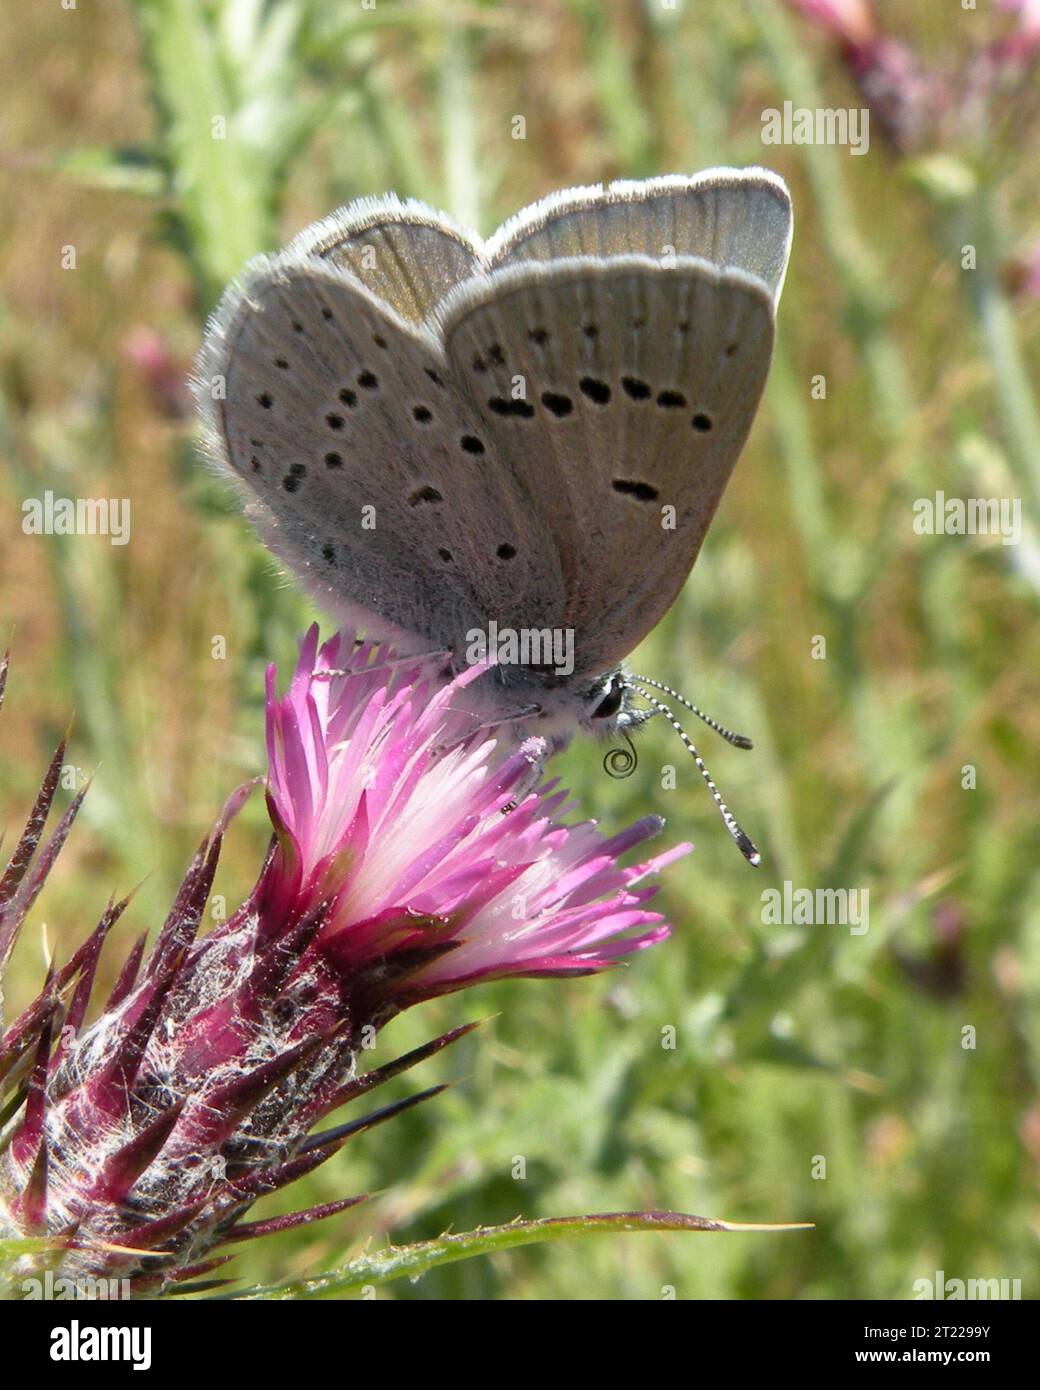 A stunning, close-up view of a Mission Blue Butterfly. This species was added to the Endangered Species list on June 8, 1976. Subjects: Insects; Endangered species. Location: California.  . 1998 - 2011. Stock Photo